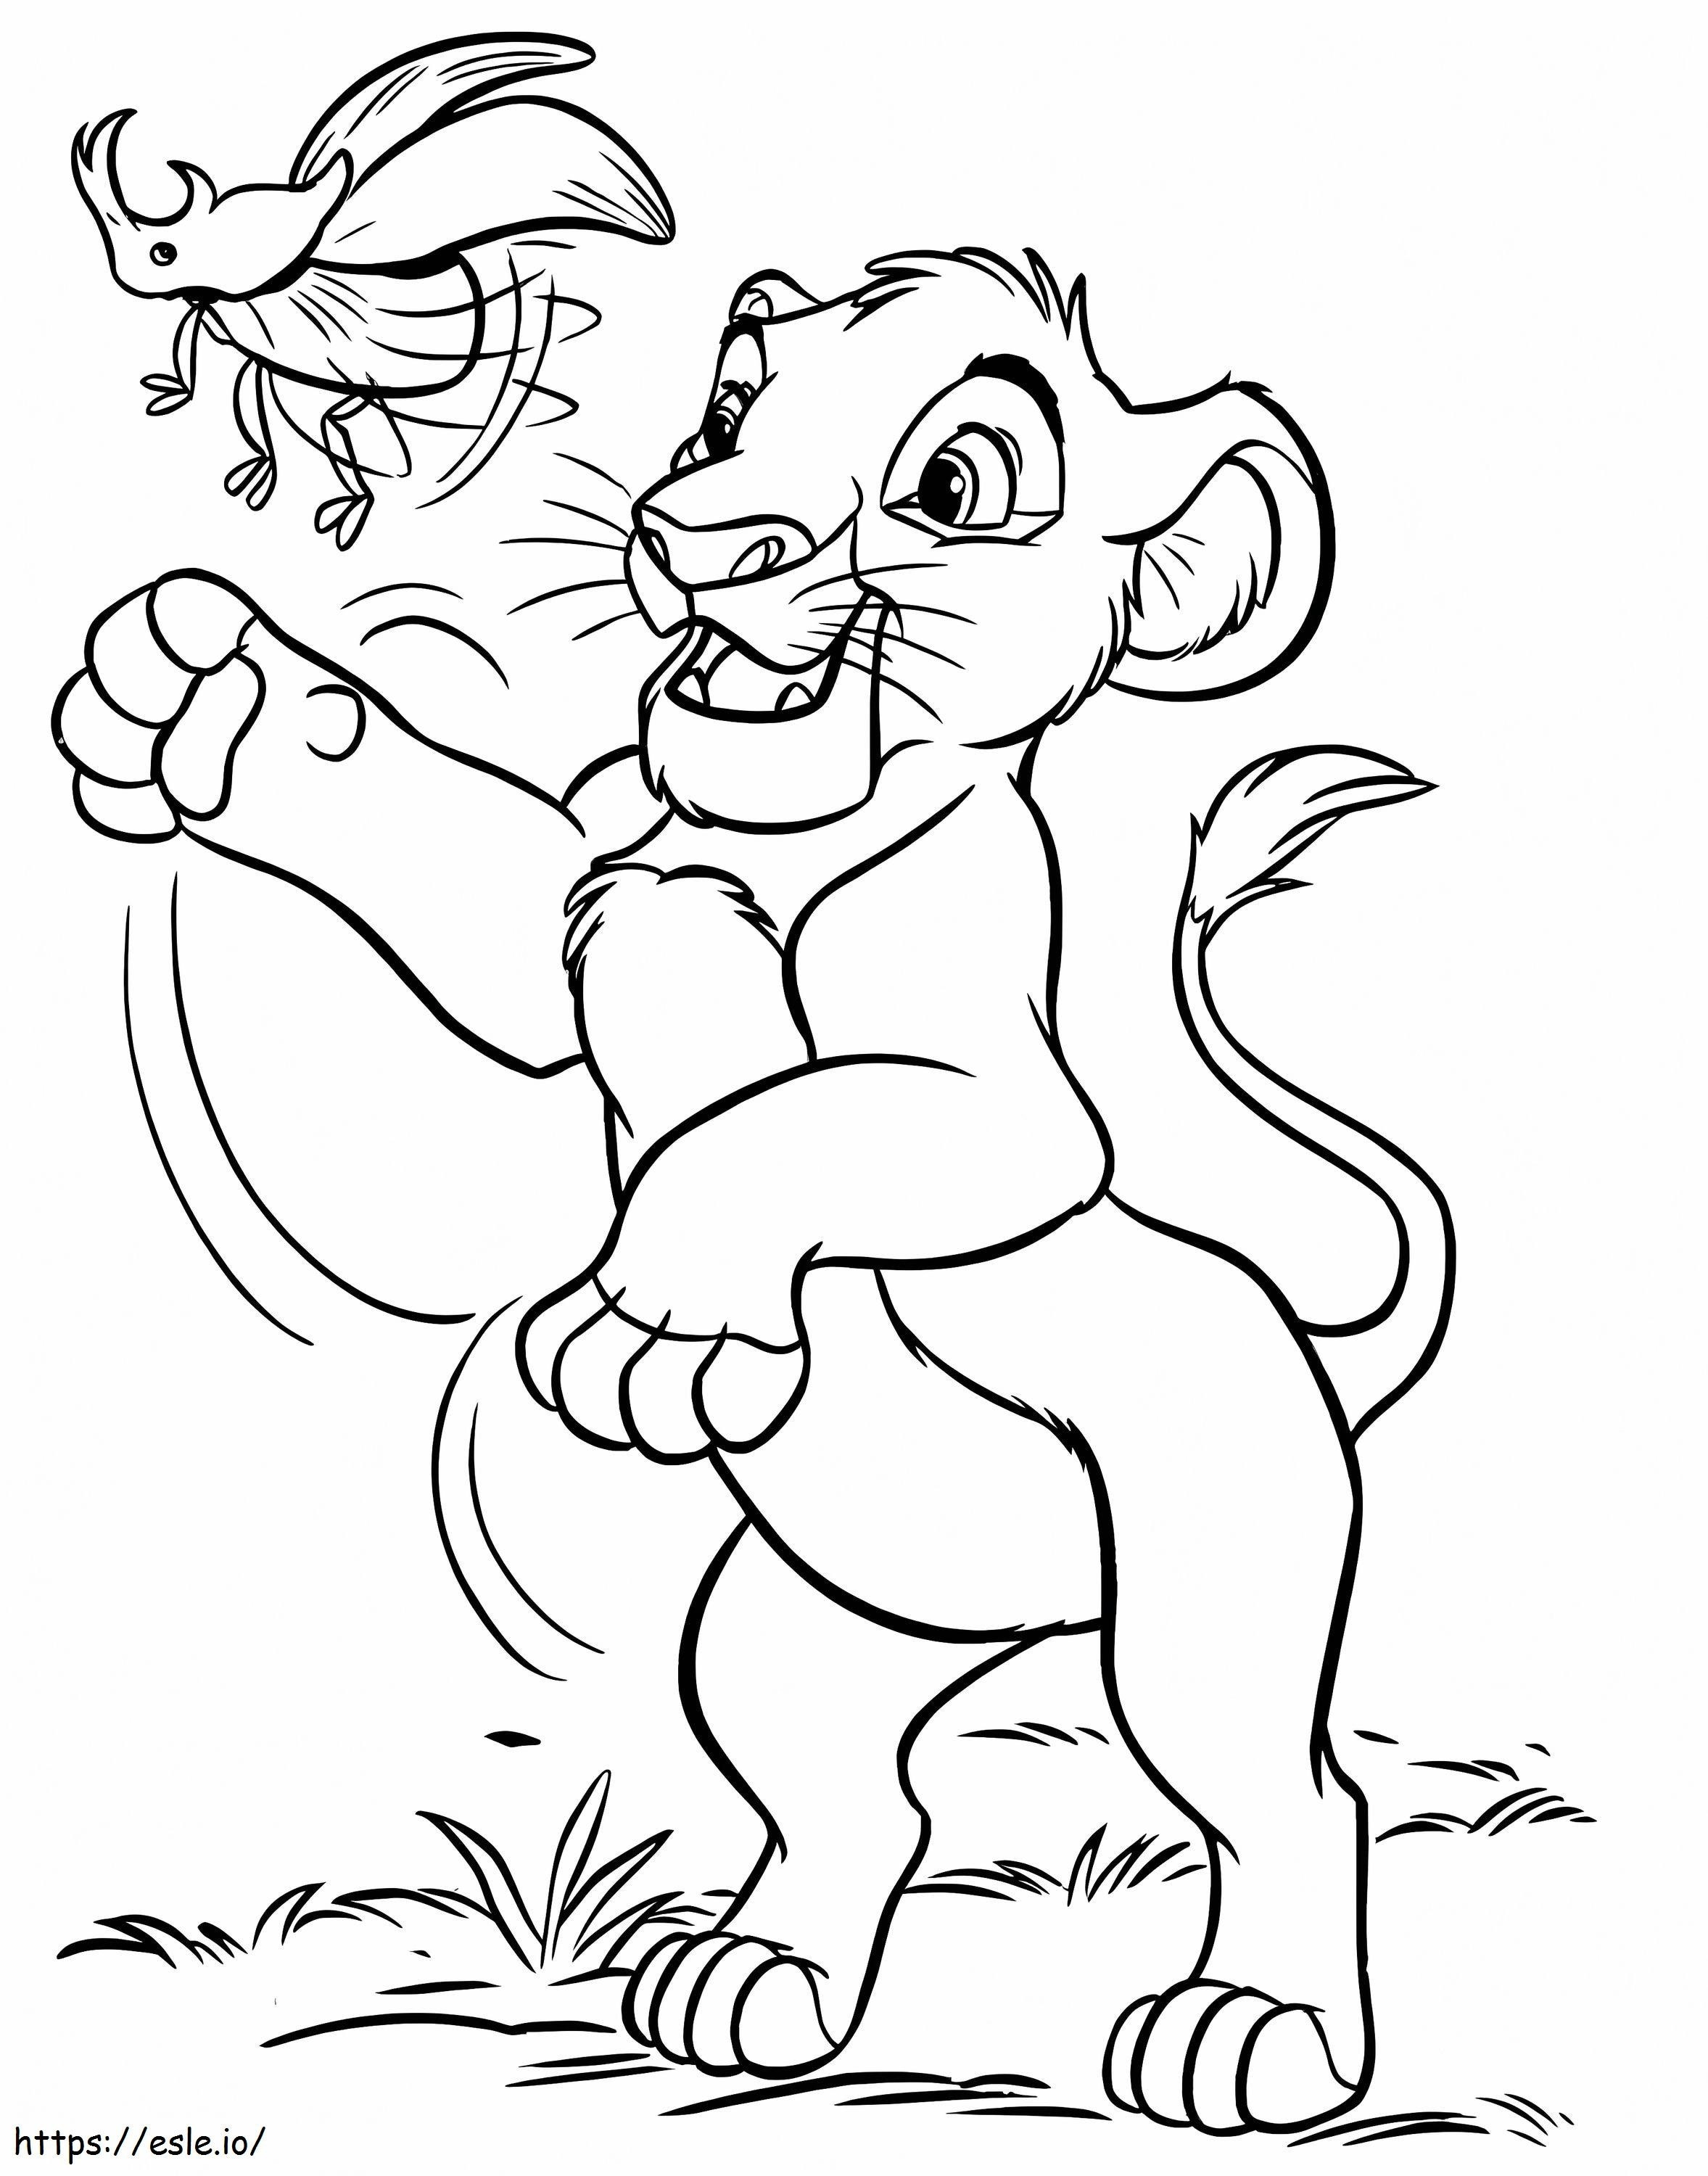 Simba And The Beetle coloring page